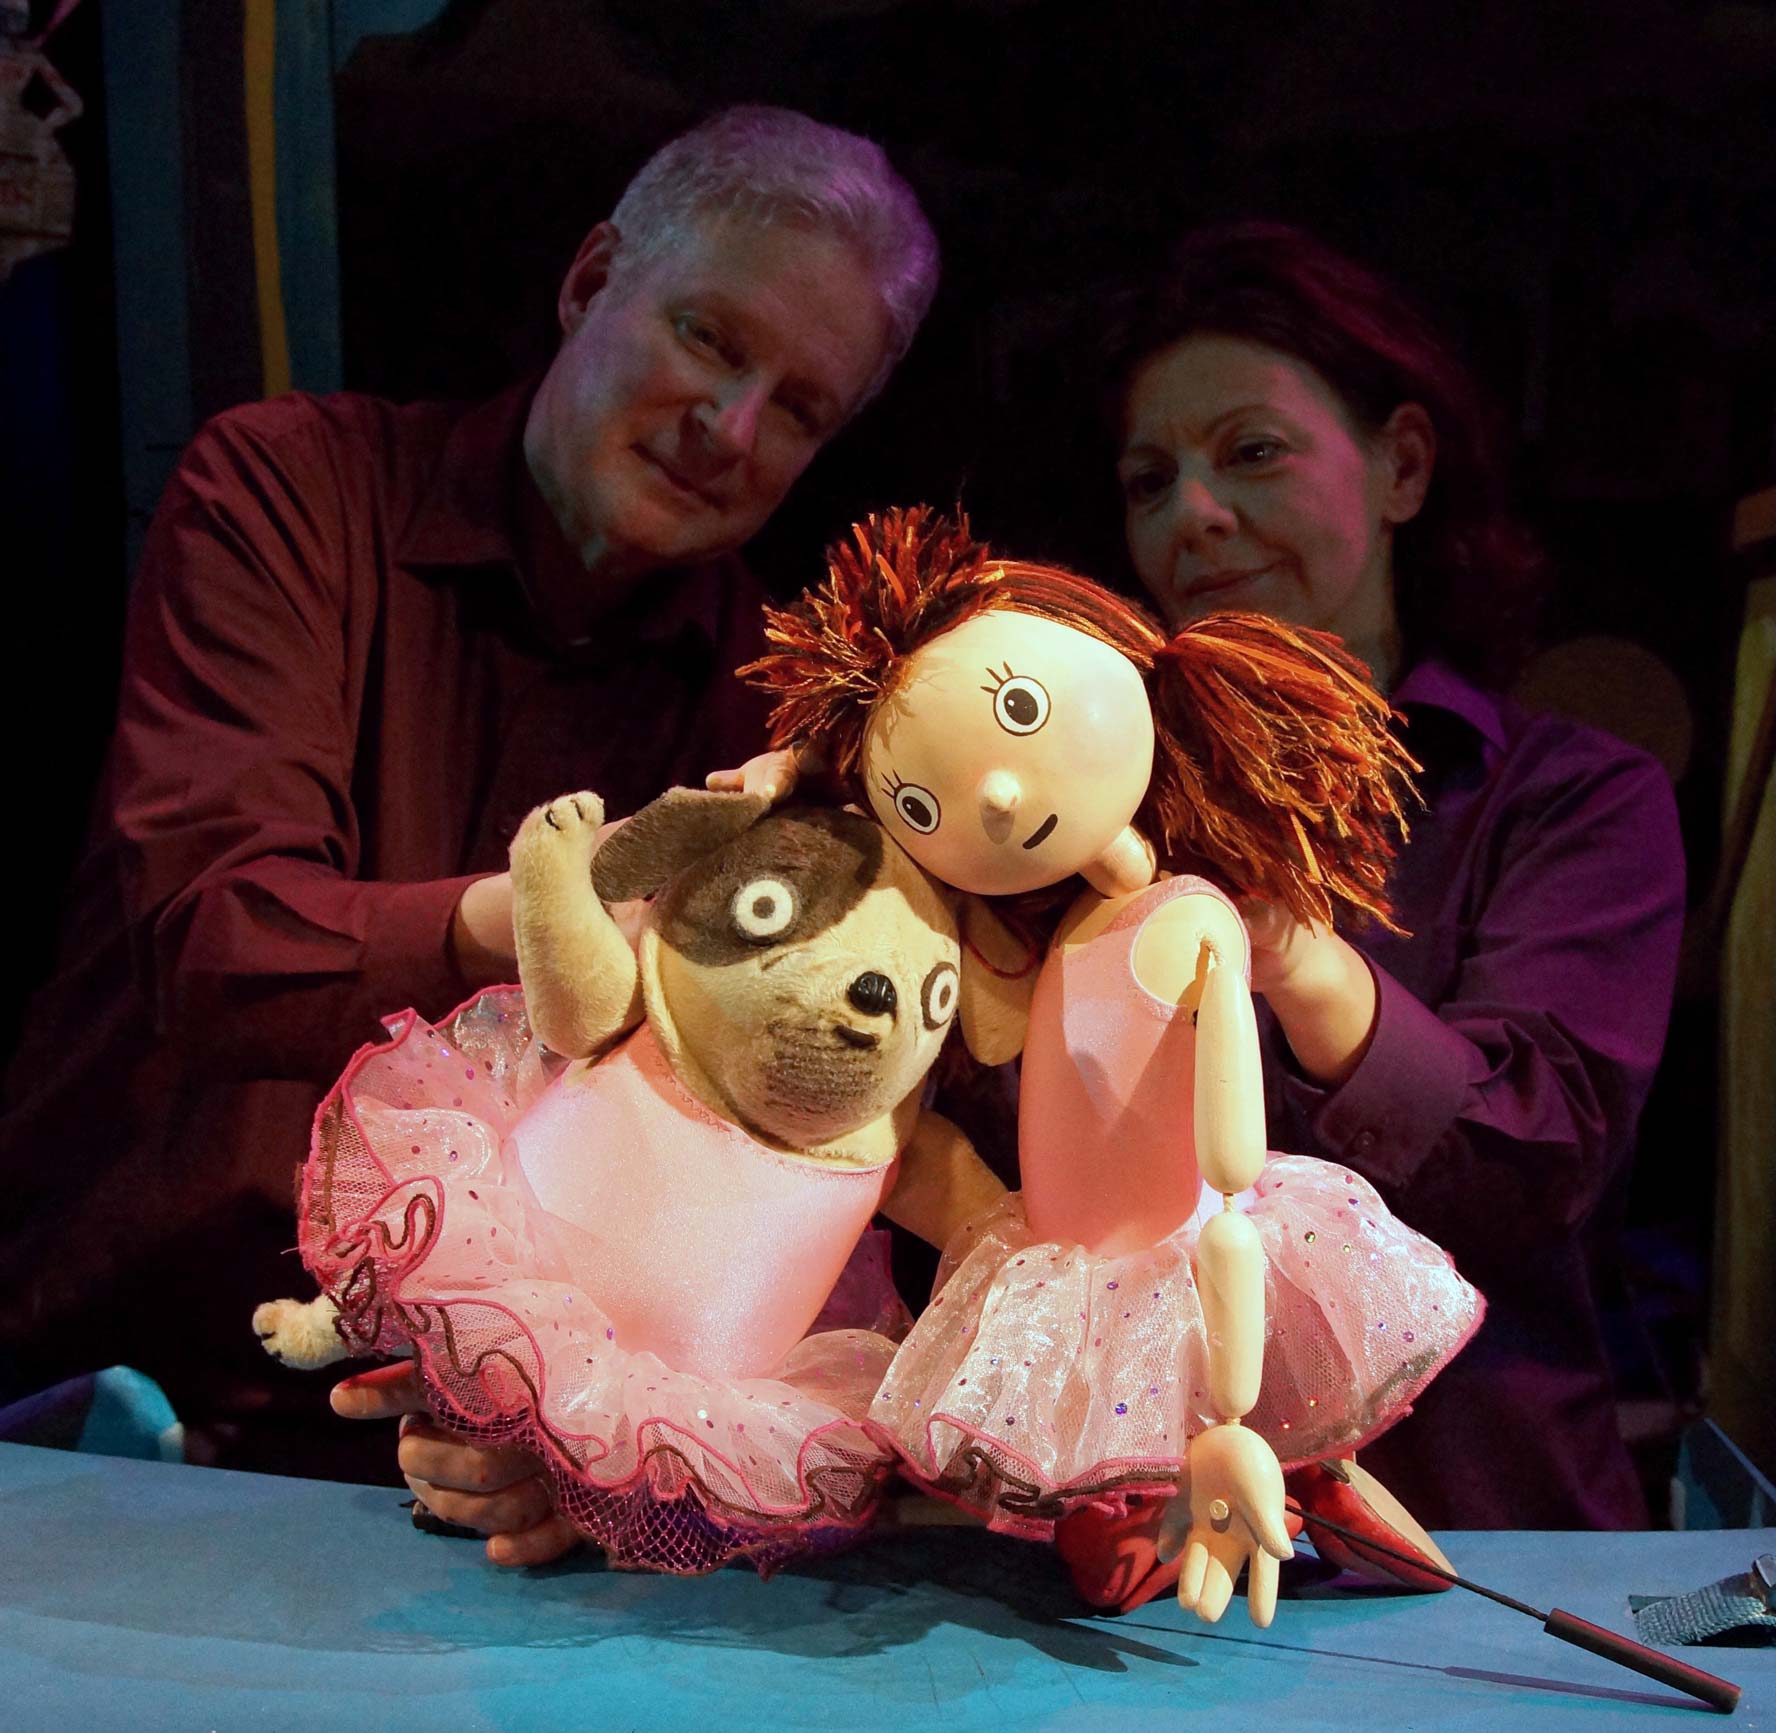 Two puppeteers hold puppets of Biff, a small dog wearing a pink ballet outfit, and Anna, dressed the same. Anna and Biff are sitting close together with their heads touching.